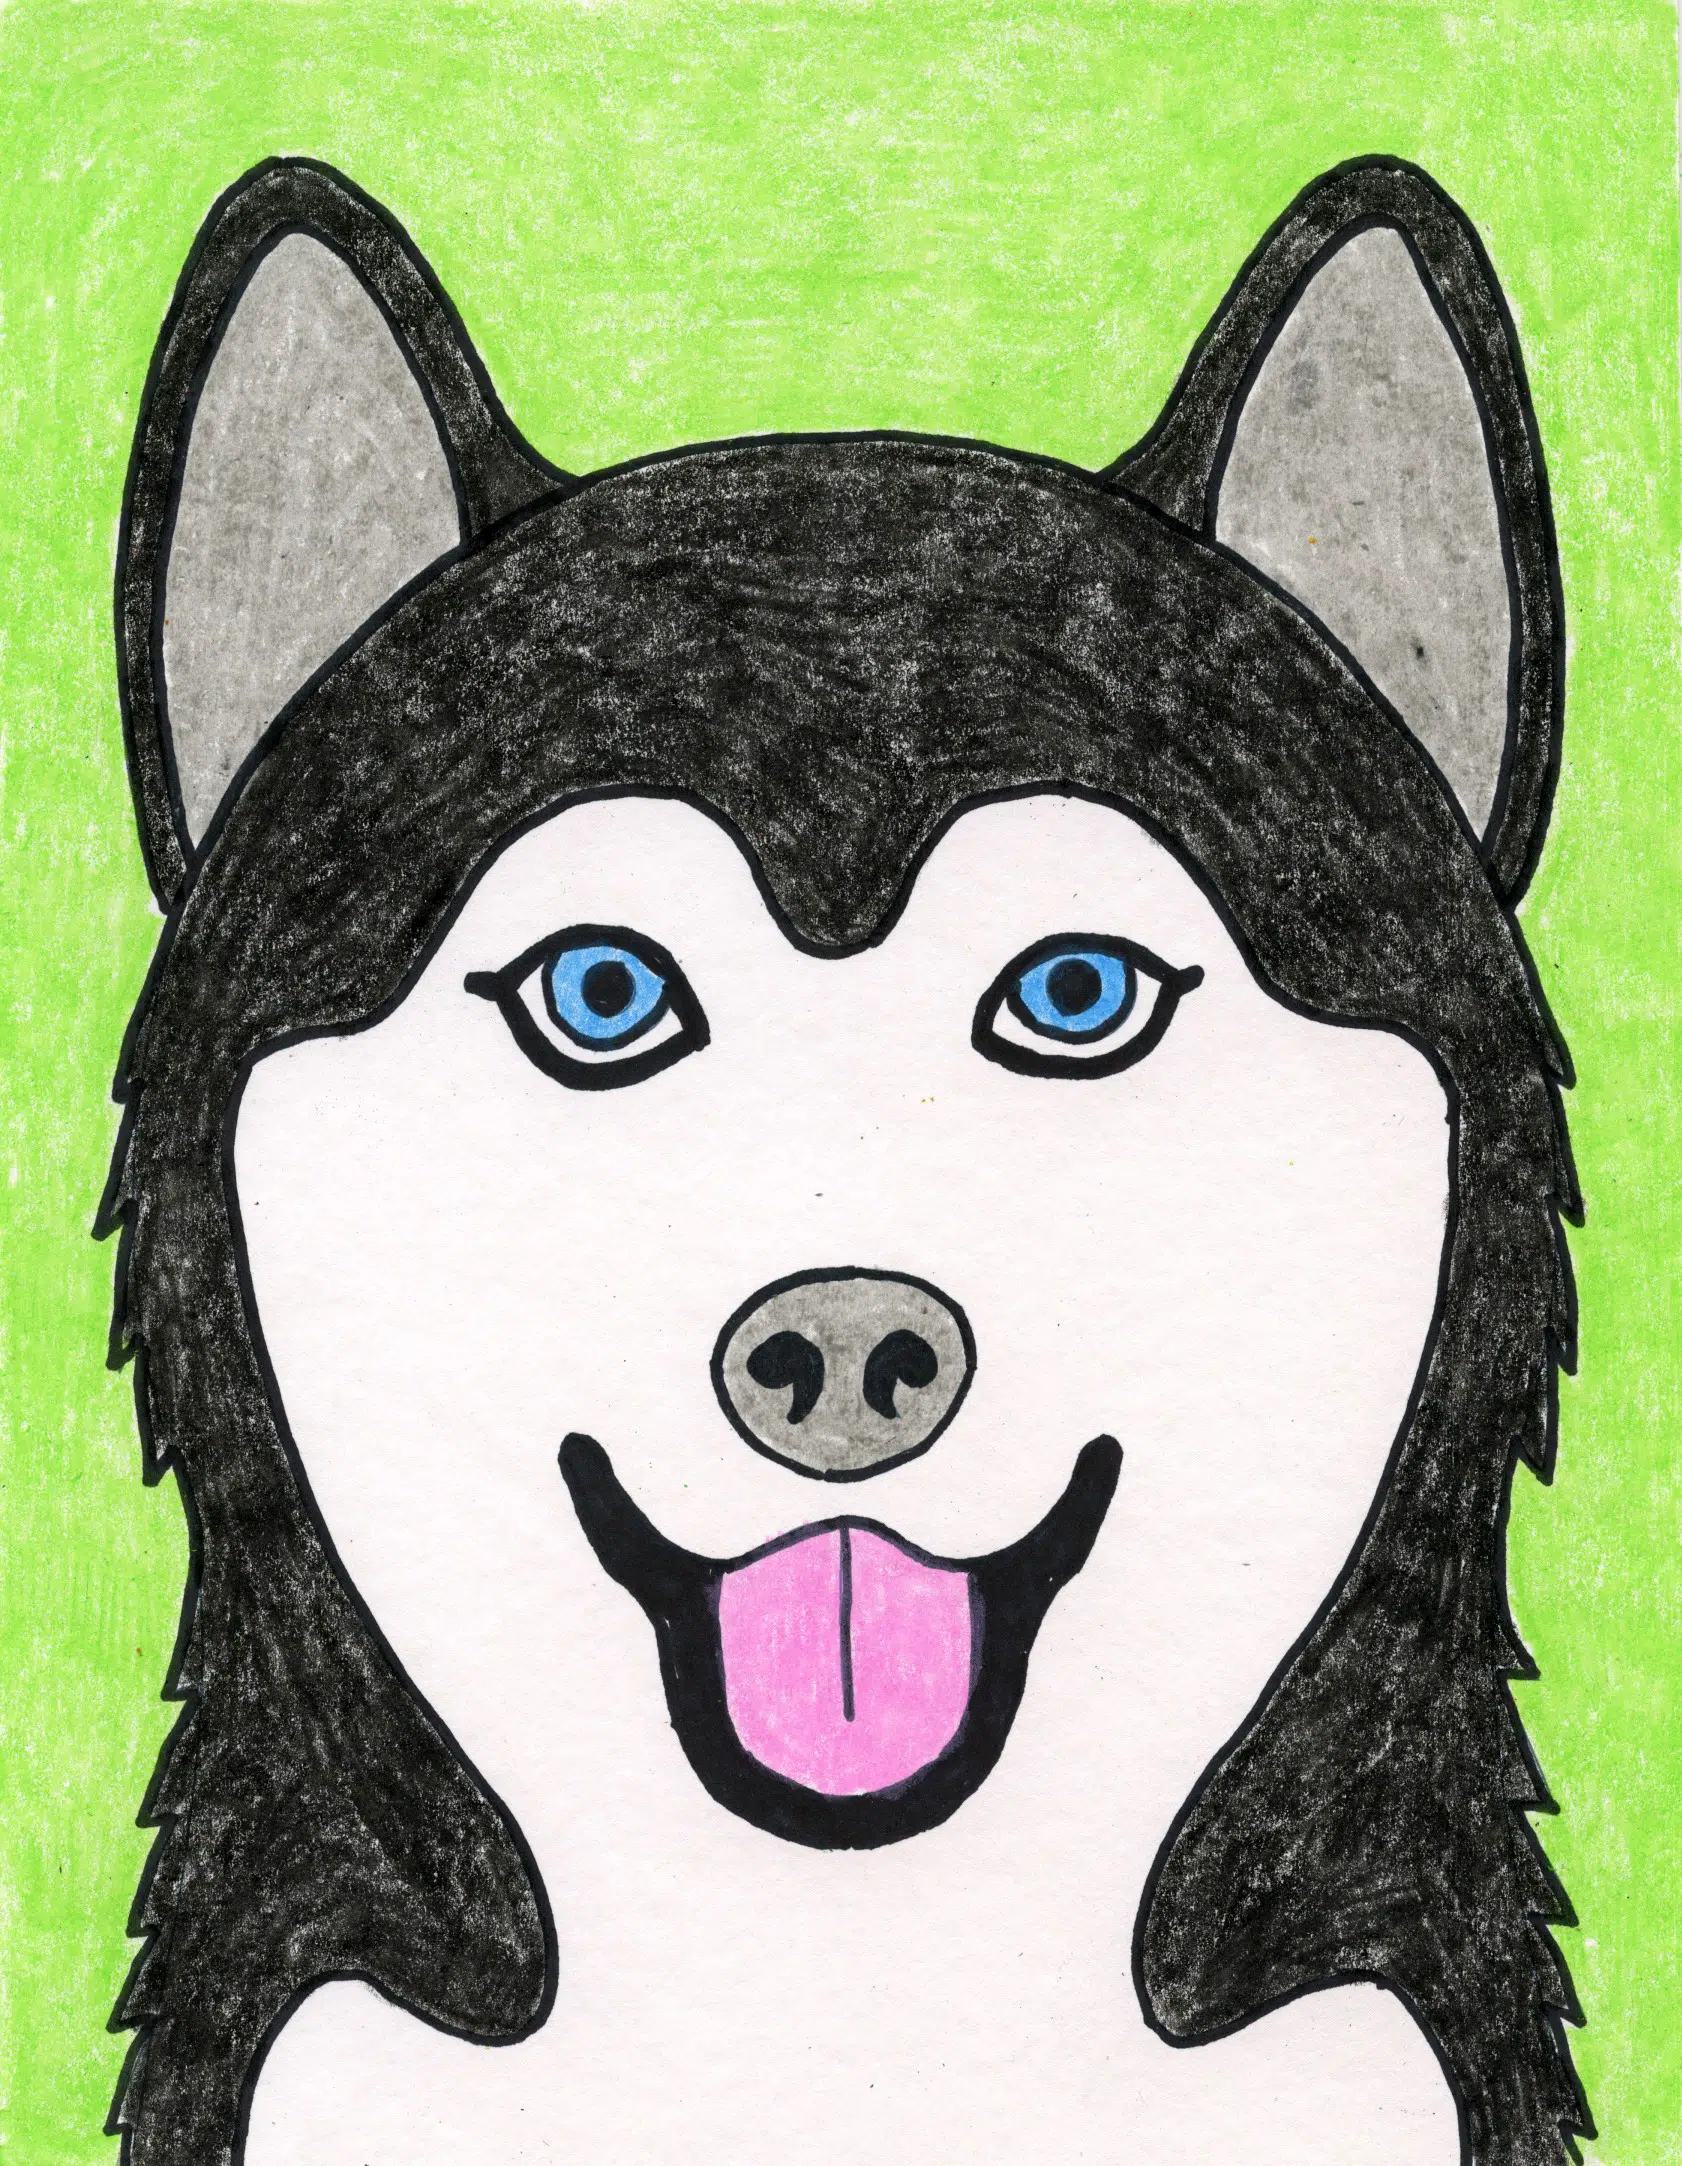 Easy How to Draw a Husky Tutorial and Husky Coloring Page